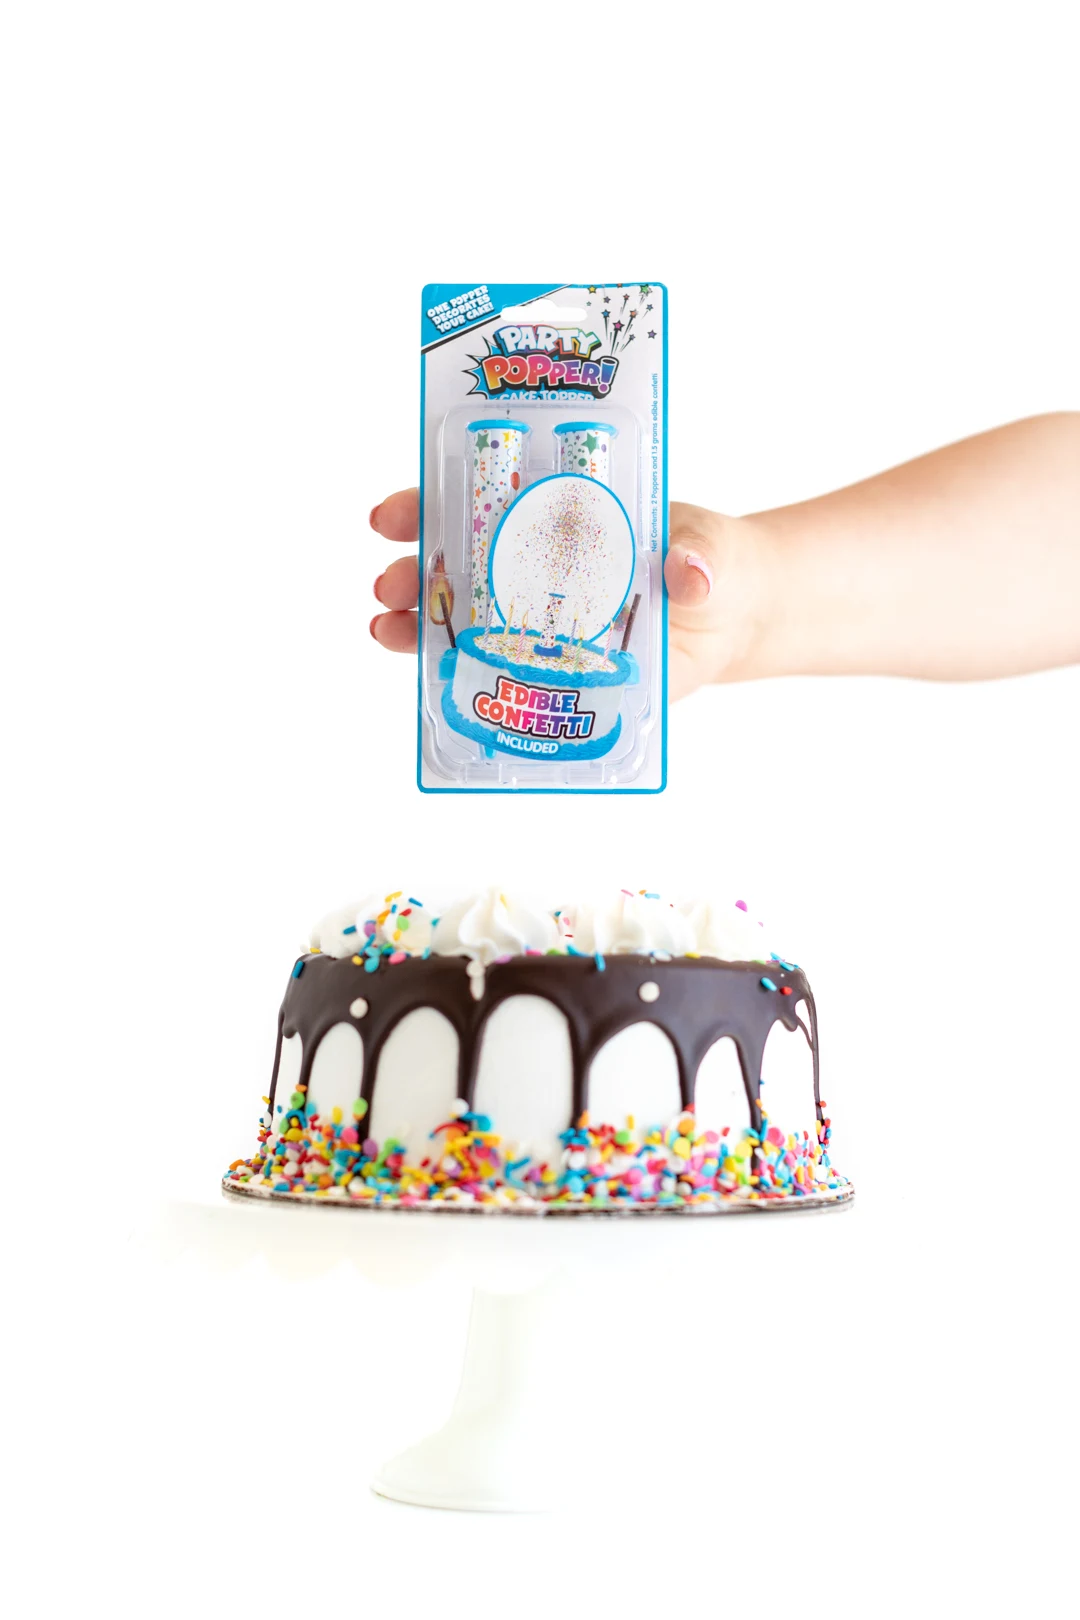 holding a package of party popper! cake topper candle placed on top of a white birthday cake with sprinkles and a chocolate drip.